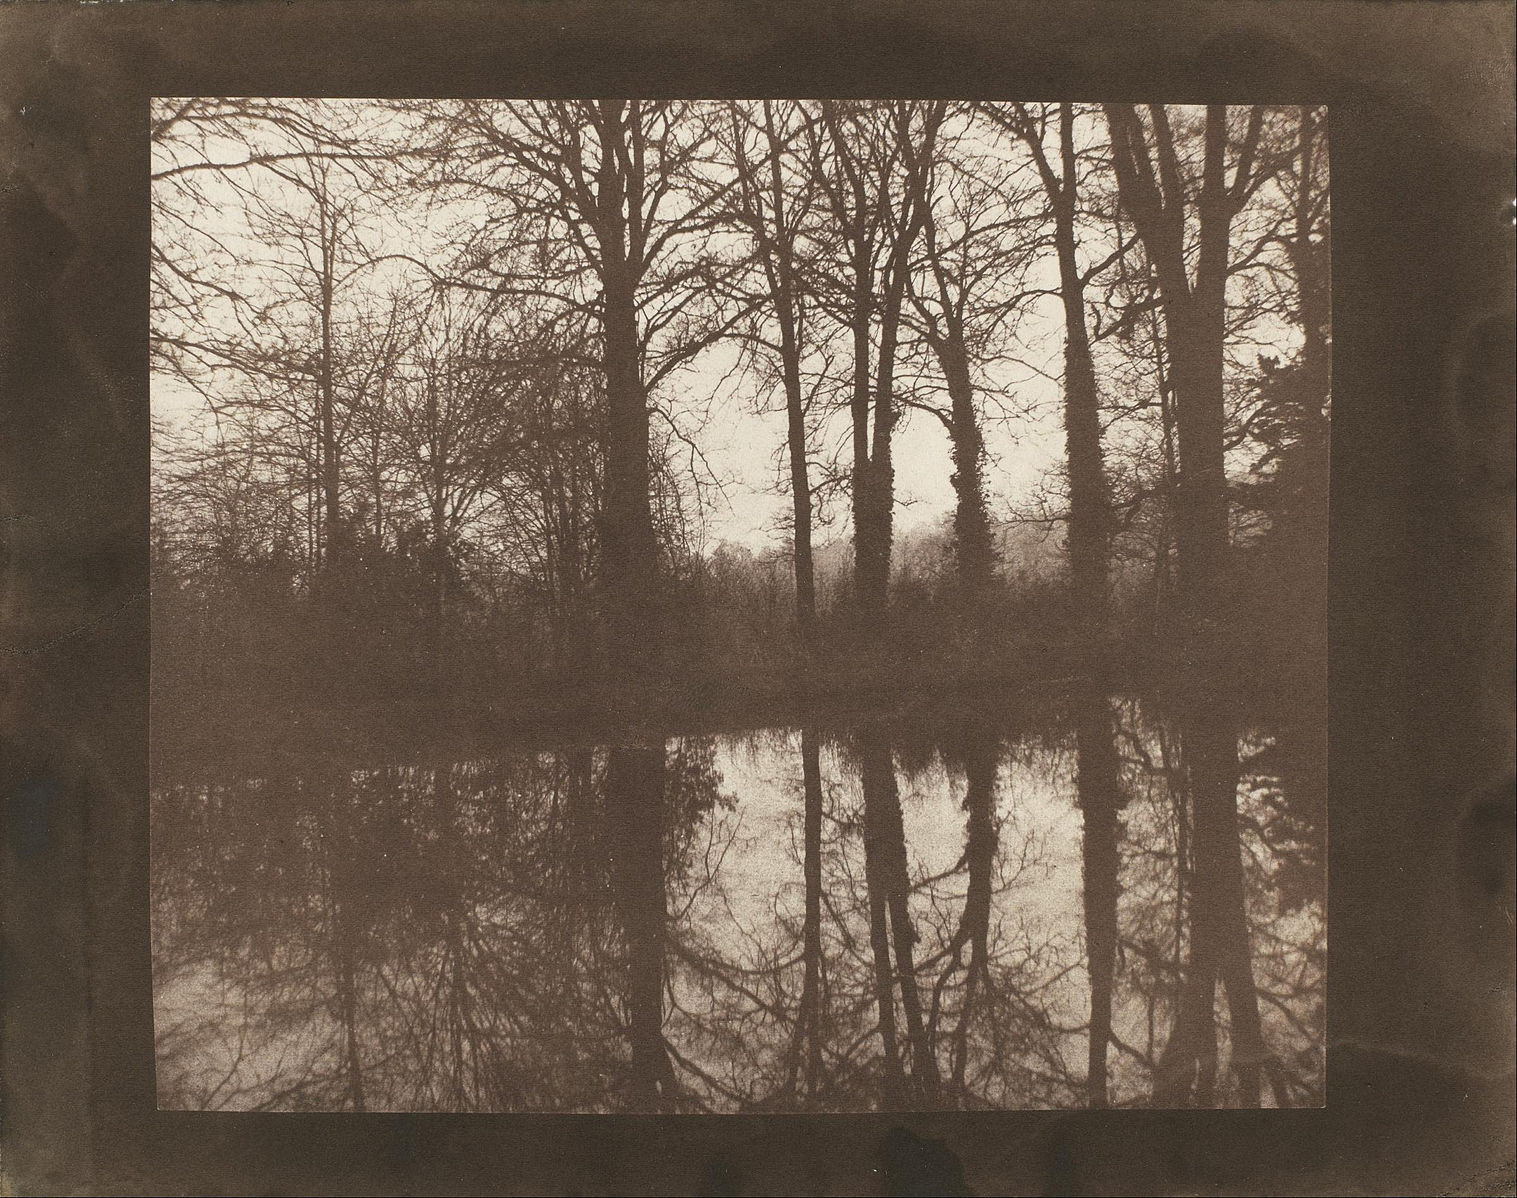 Trees and Reflections (1842). William Henry Fox Talbot. Museum of Fine Arts, Houston.